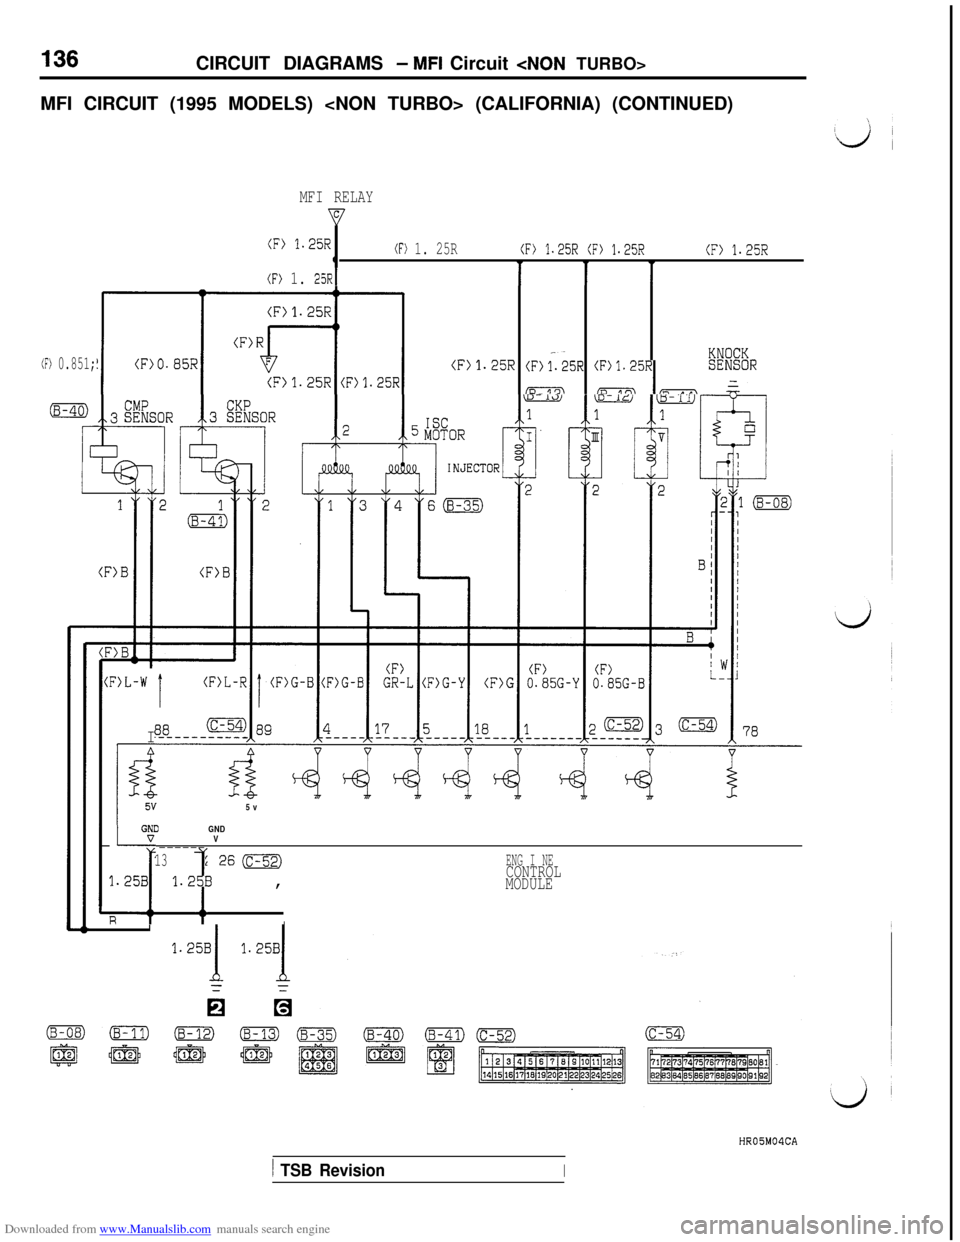 MITSUBISHI 3000GT 1994 2.G Workshop Manual Downloaded from www.Manualslib.com manuals search engine CIRCUIT DIAGRAMS - MFI Circuit <NON TURBO>
MFI CIRCUIT (1995 MODELS) <NON TURBO> (CALIFORNIA) (CONTINUED)
MFI RELAY
(F> 1.25R(F> 1. 25R(F) 1.25